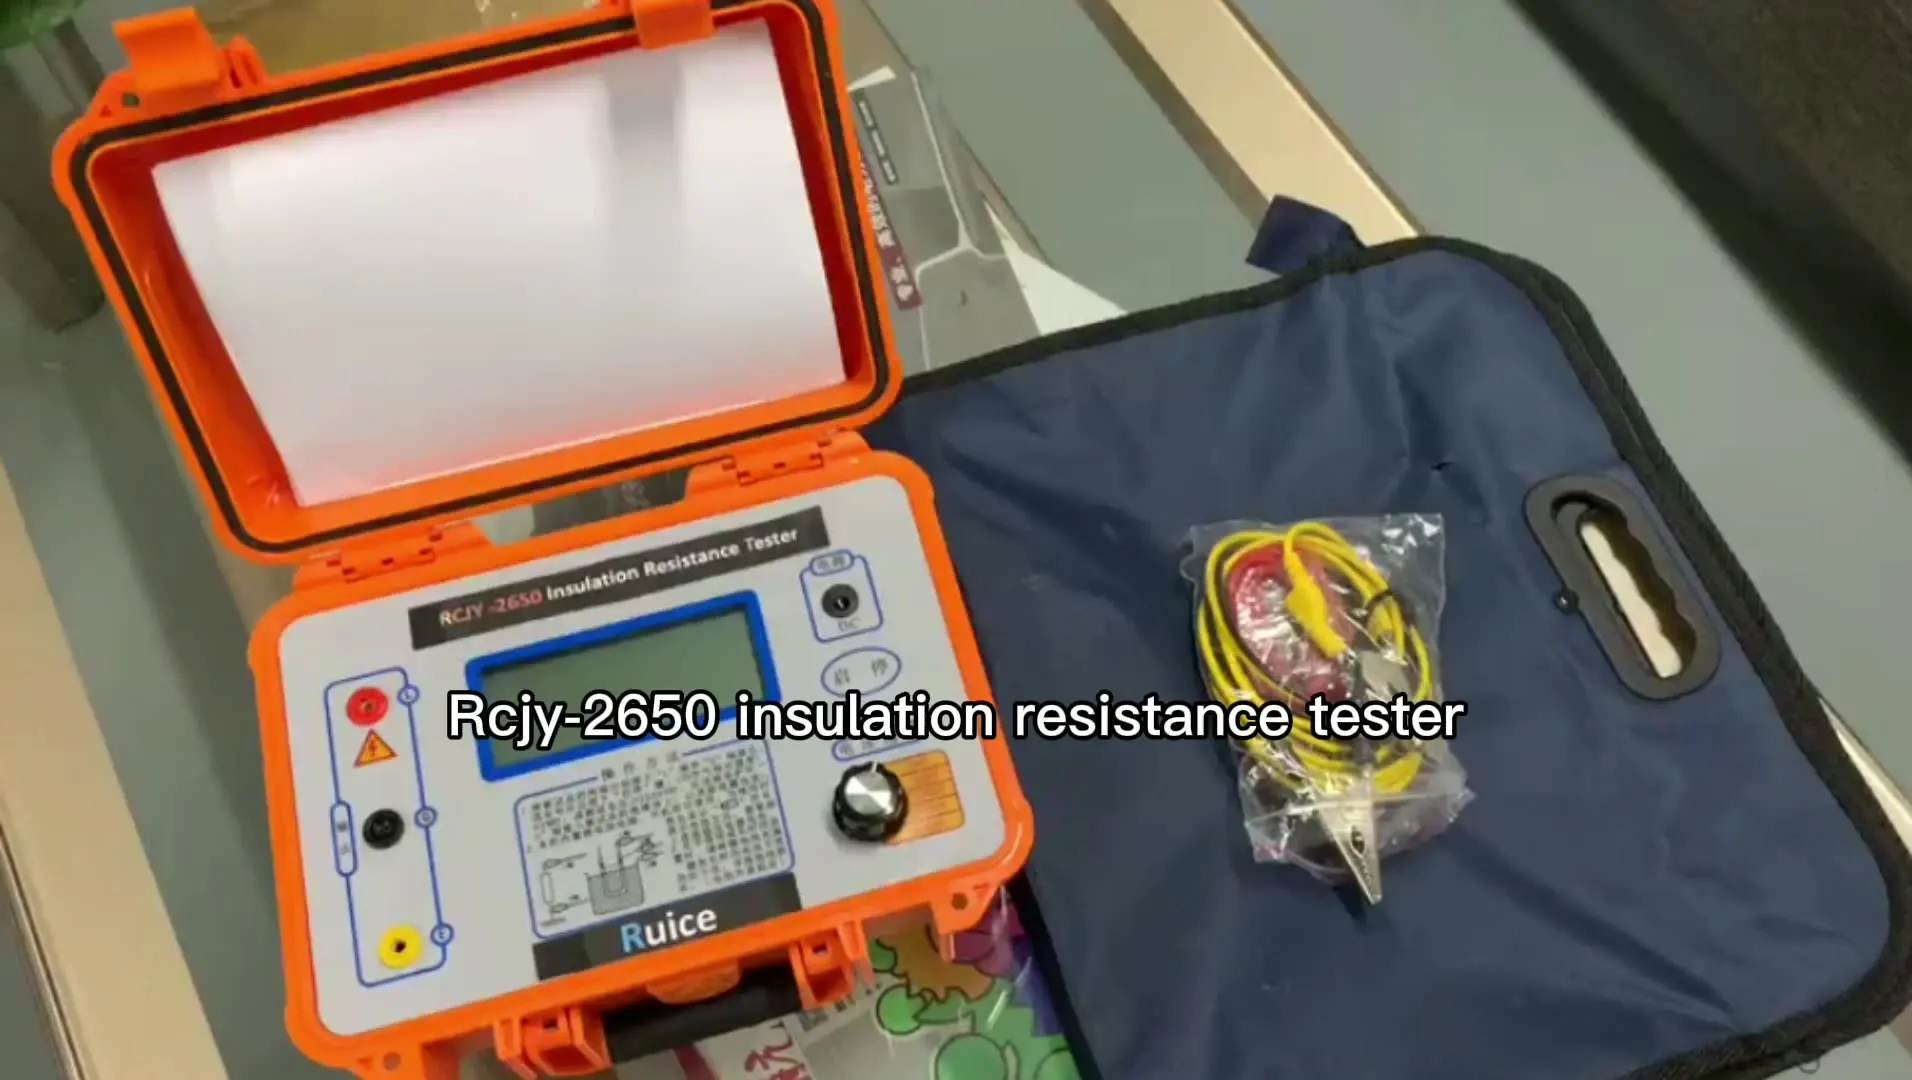 

RCJY-2650 special insulation resistance tester for high quality maintenance is suitable for insulation test in test and verifica